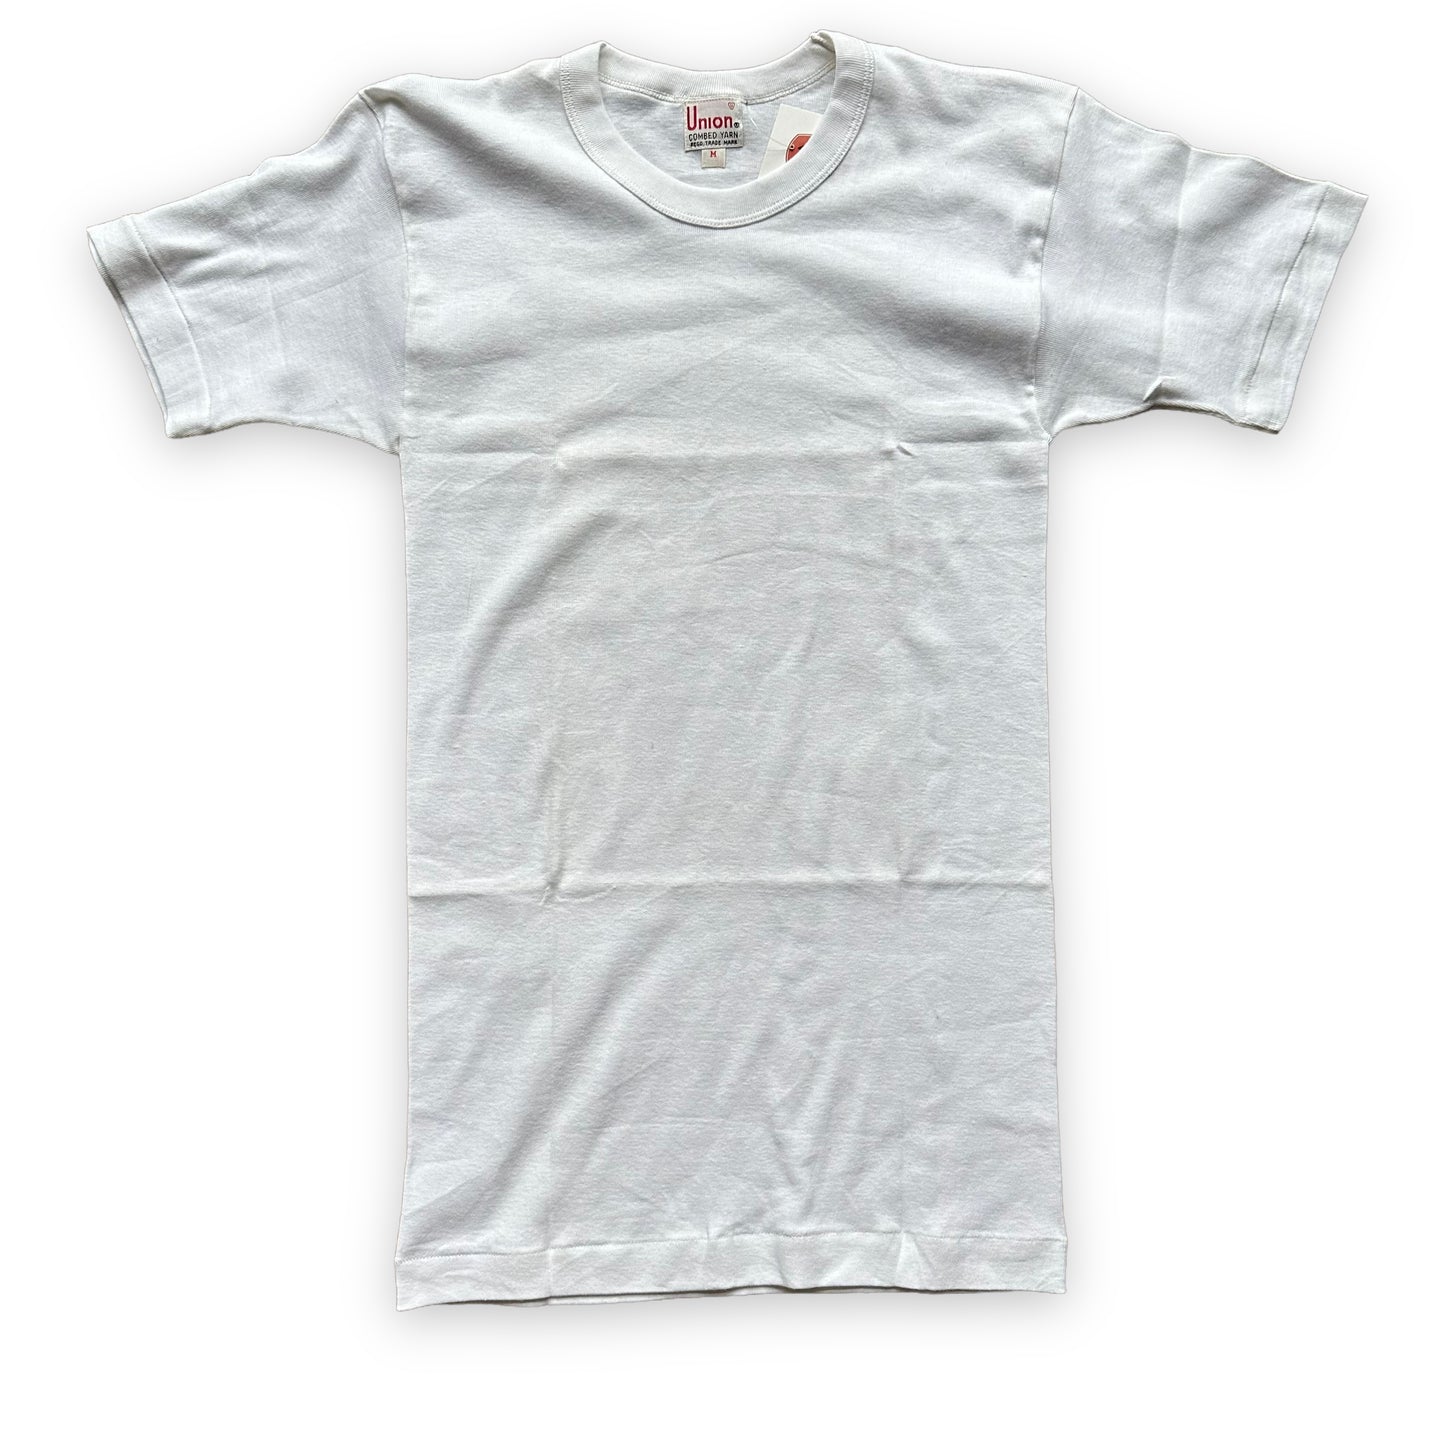 Front View of Vintage Union Combed Yarn Blank Tee Shirt SZ M | Vintage Blank Tees Seattle | Vintage T-Shirts Seattle